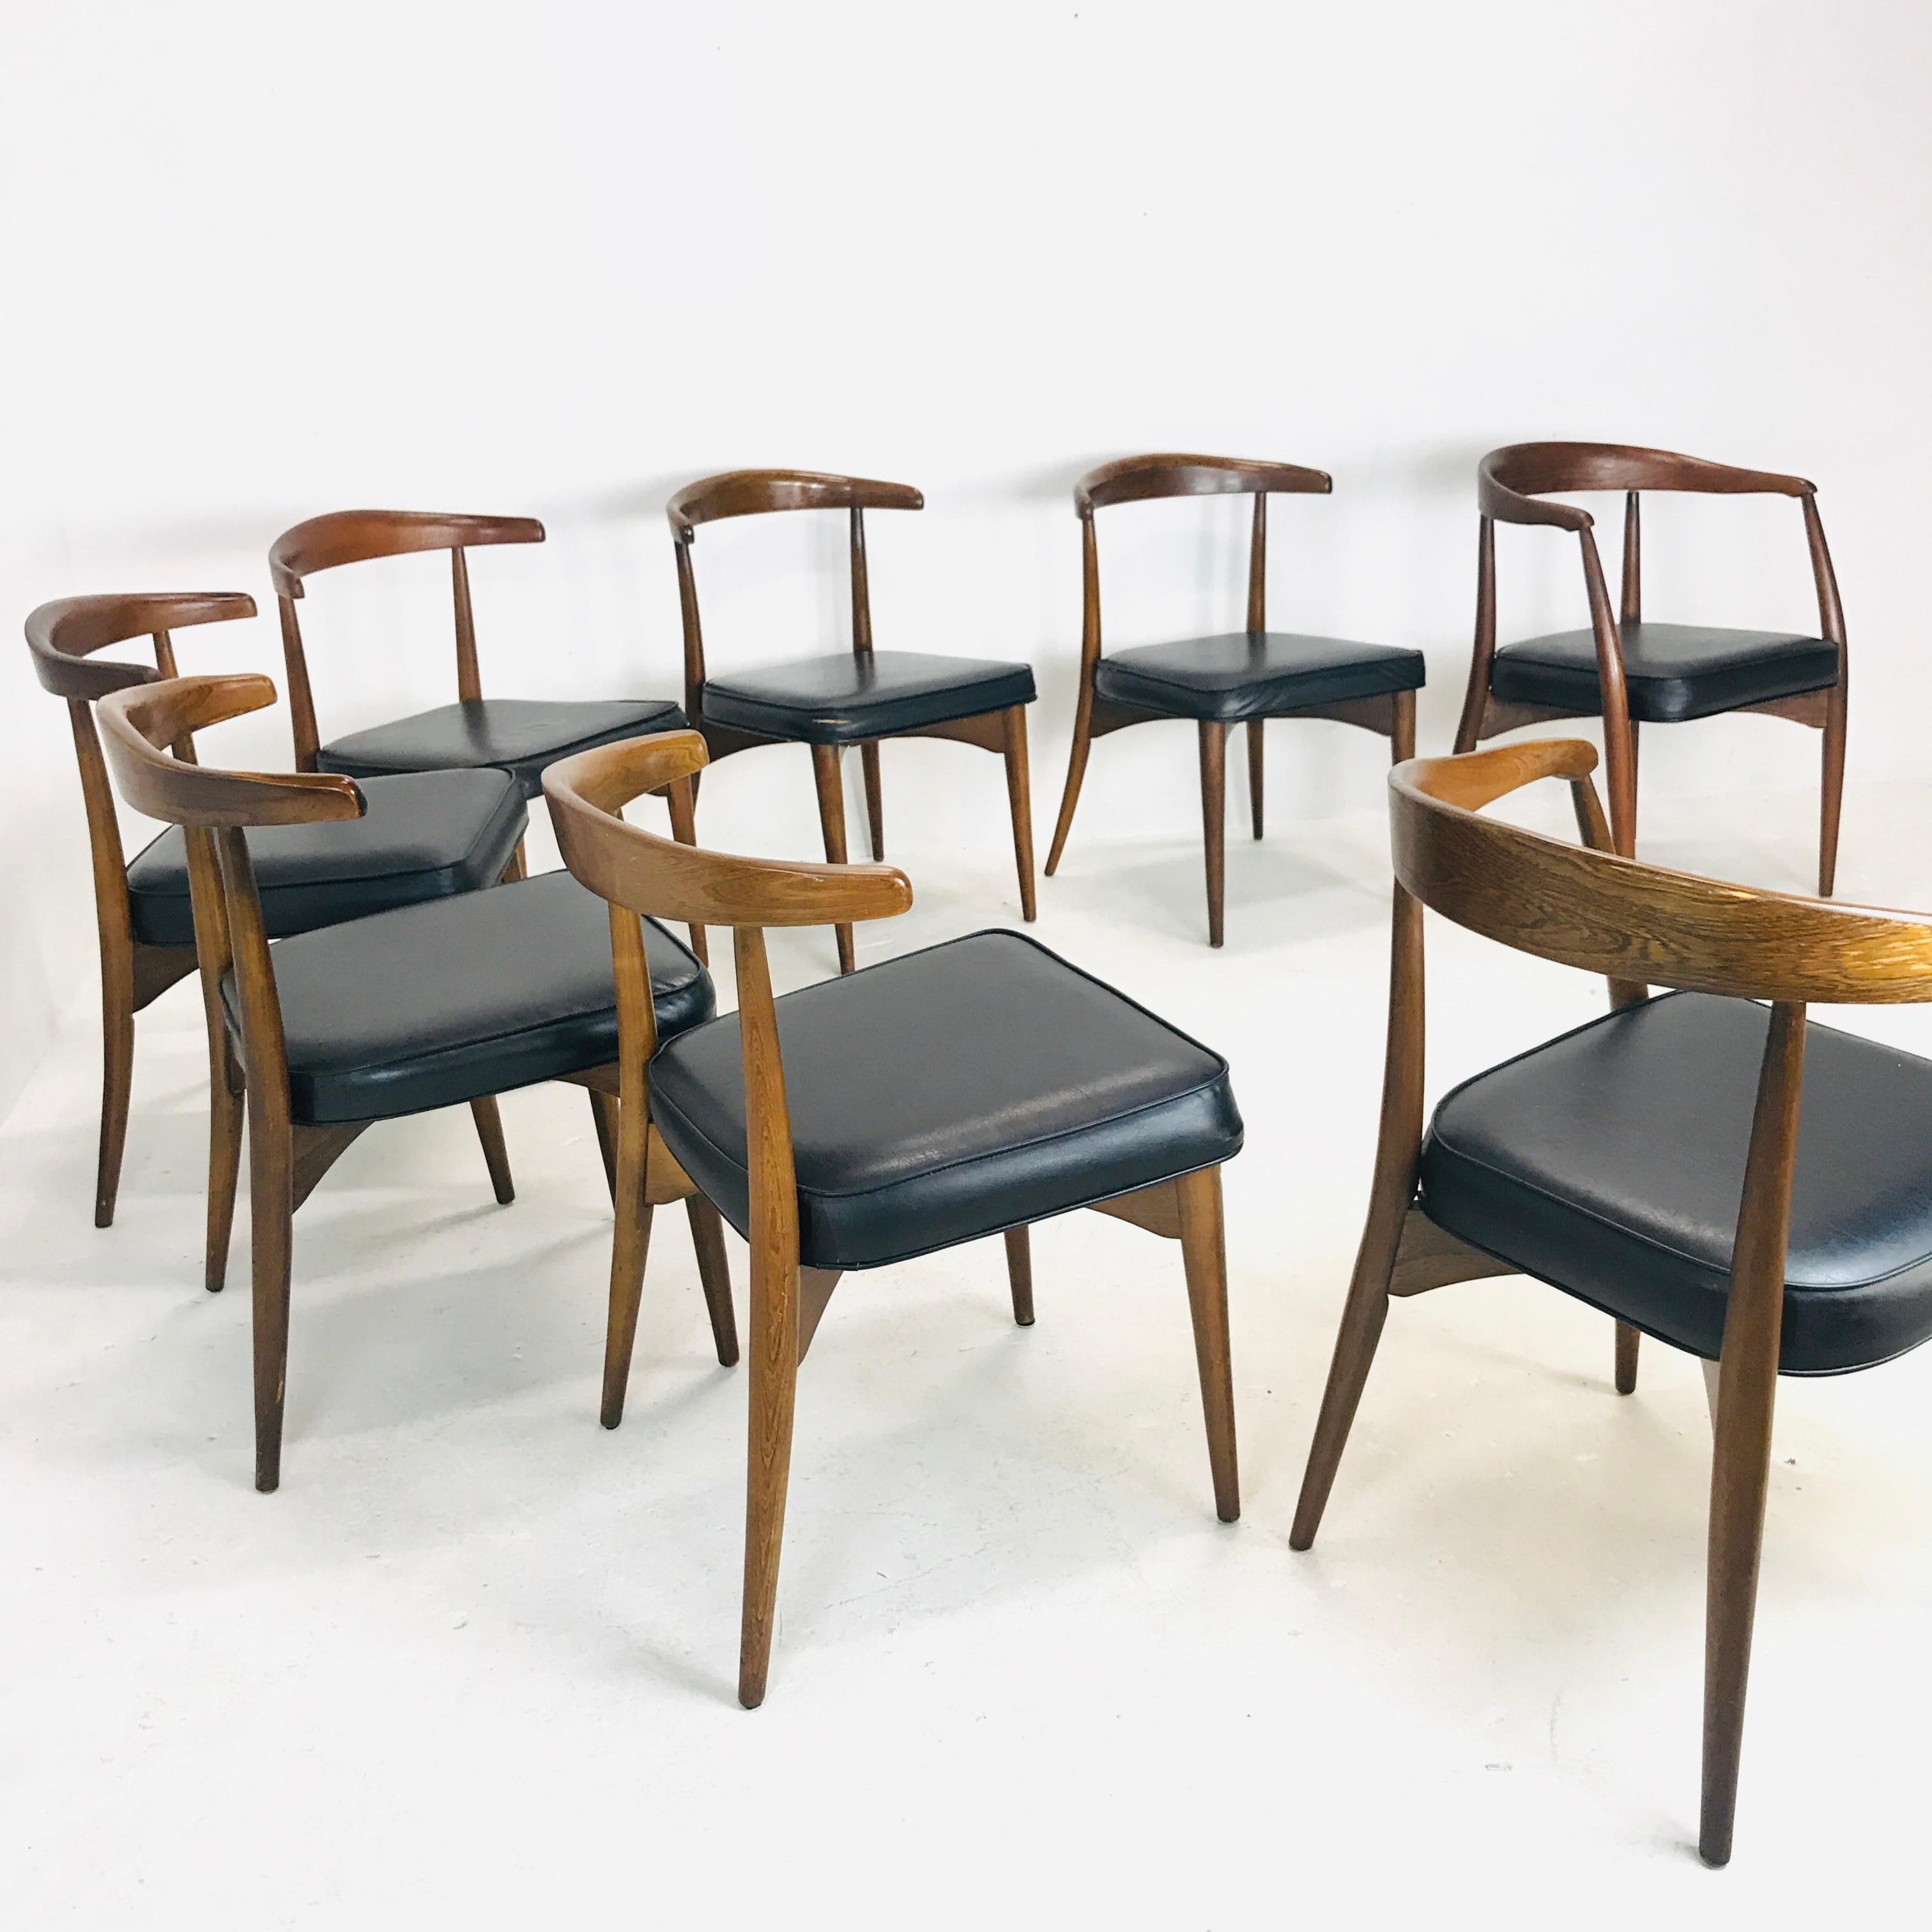 2 armchairs and 6 side chairs by Lawrence Peabody in oak, walnut and black vinyl, circa early 1960s. Armchairs measure: 30.25